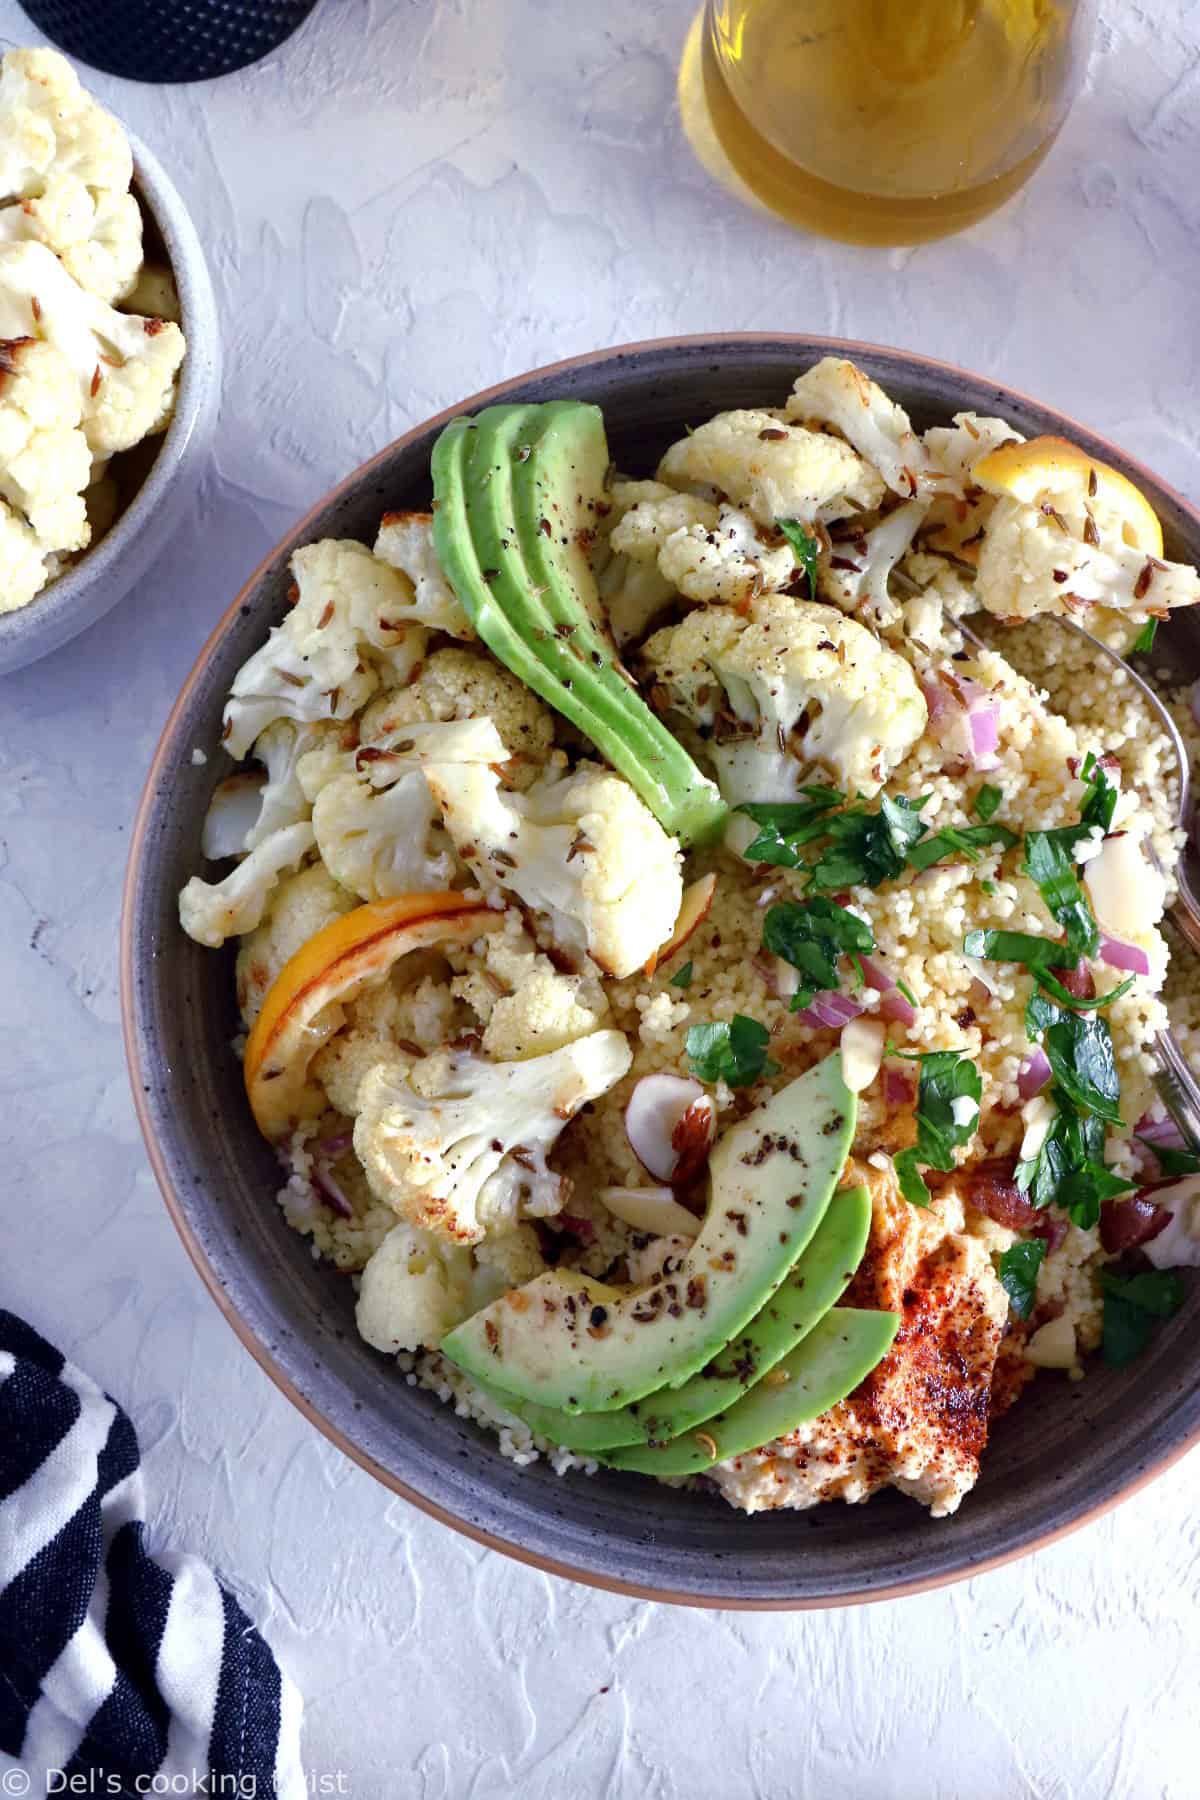 This quick and easy cumin-roasted cauliflower tabbouleh salad is game-changing. It's a super healthy vegan salad recipe, packed with delicious roasted veggies, fresh herbs, and loaded with plant-based protein.